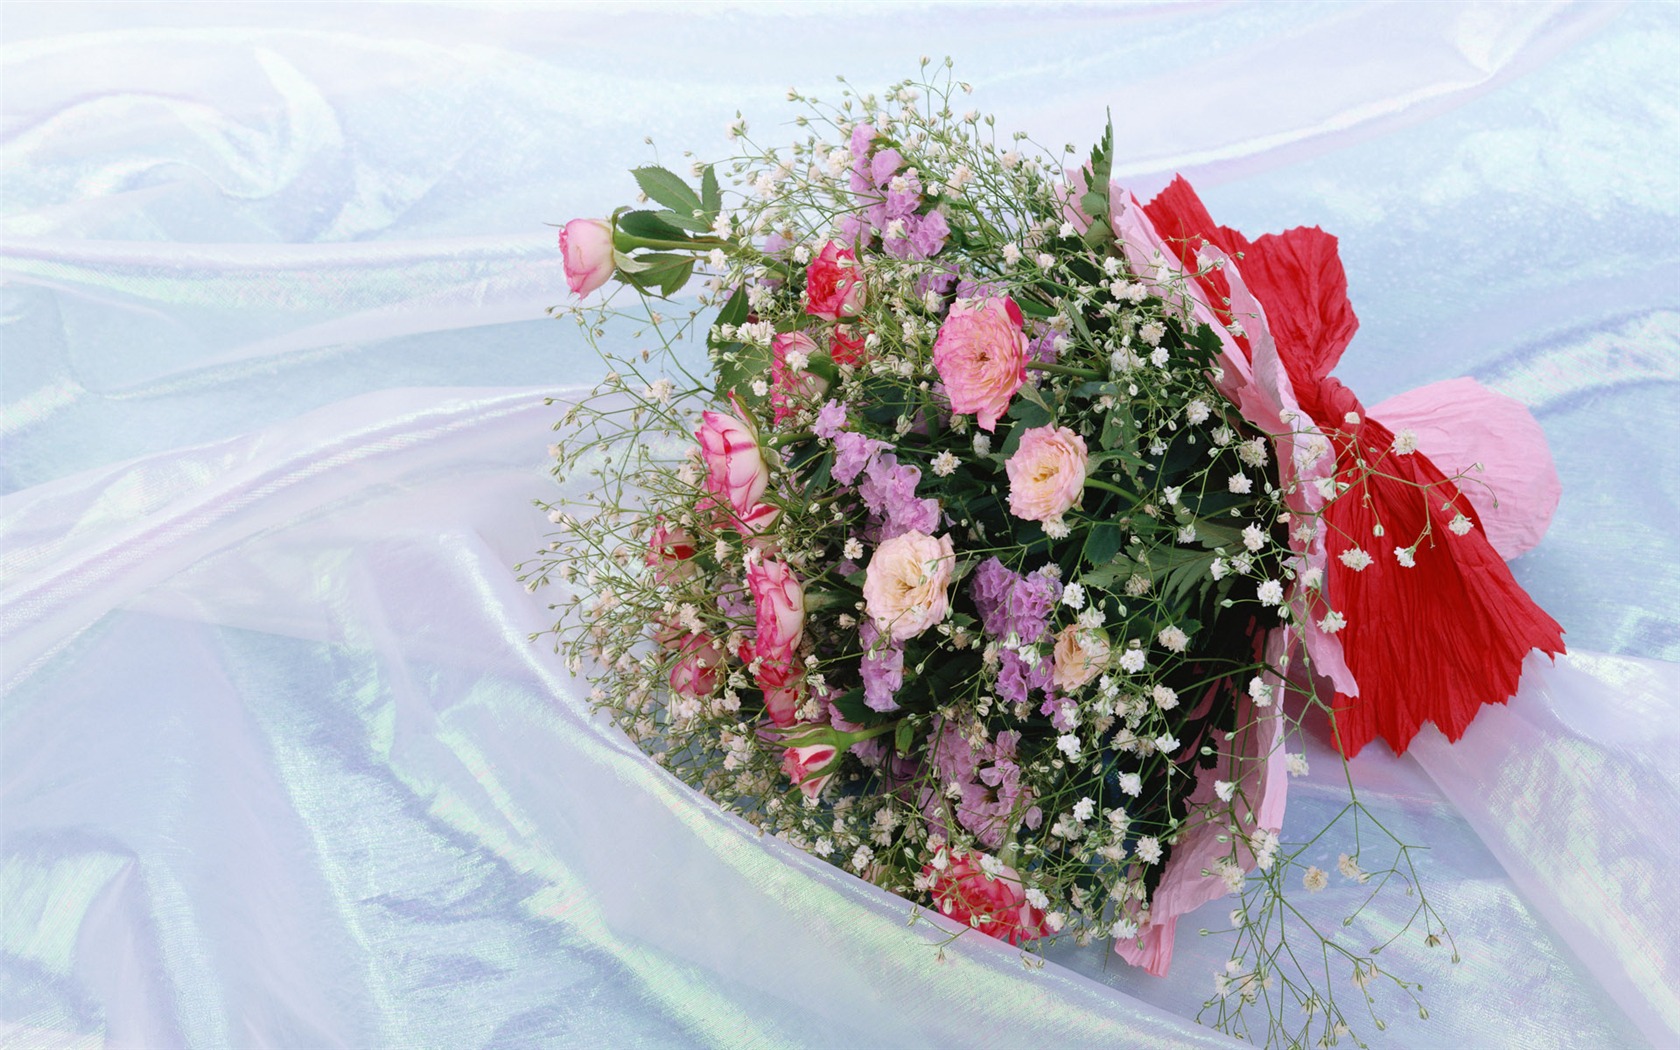 Weddings and Flowers wallpaper (2) #14 - 1680x1050